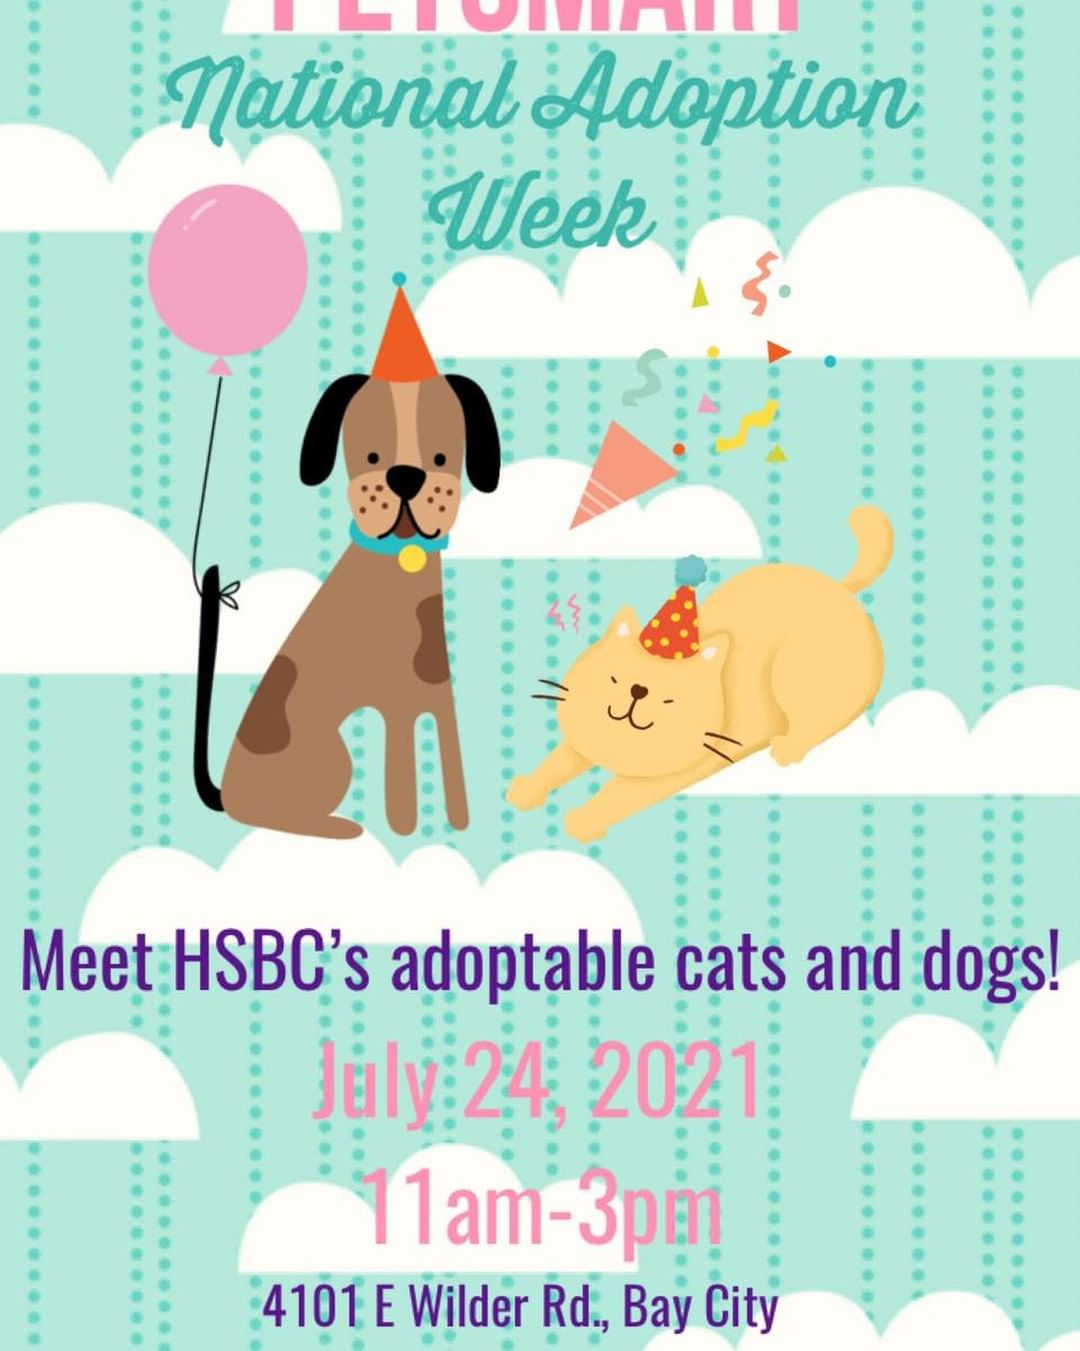 It’s National Adoption Week! We will have adoptable cats and dogs waiting to meet you at the Petsmart on Wilder Rd. in Bay City. We will be there on Saturday, July 24th, from 11am-3pm.🐾